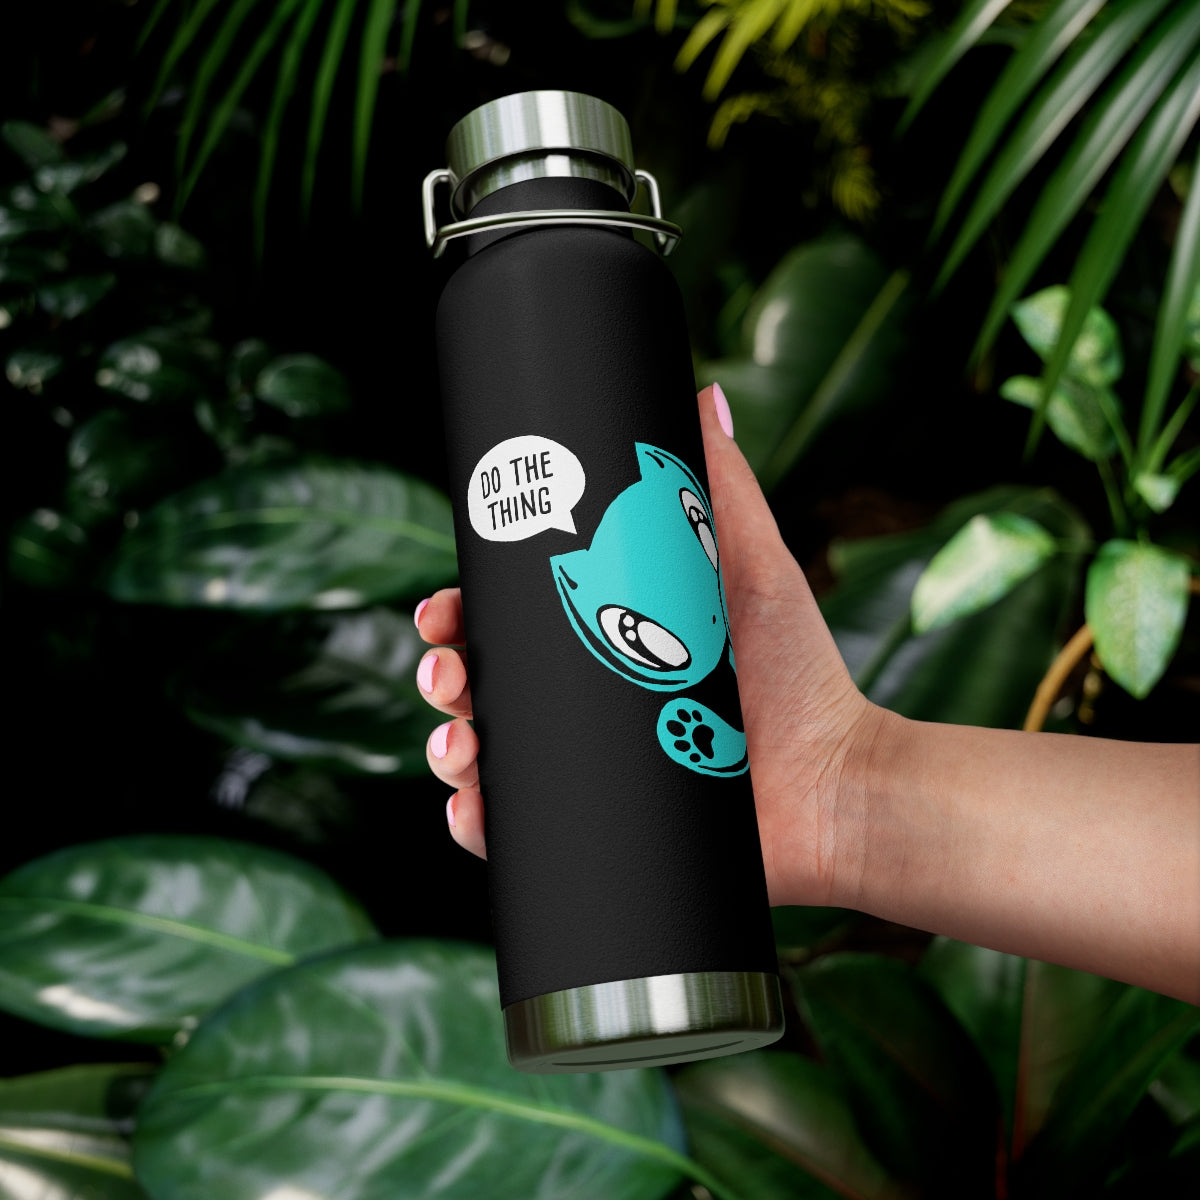 Water Bottle: Do The Thing - Skoshie the Cat (22 oz)